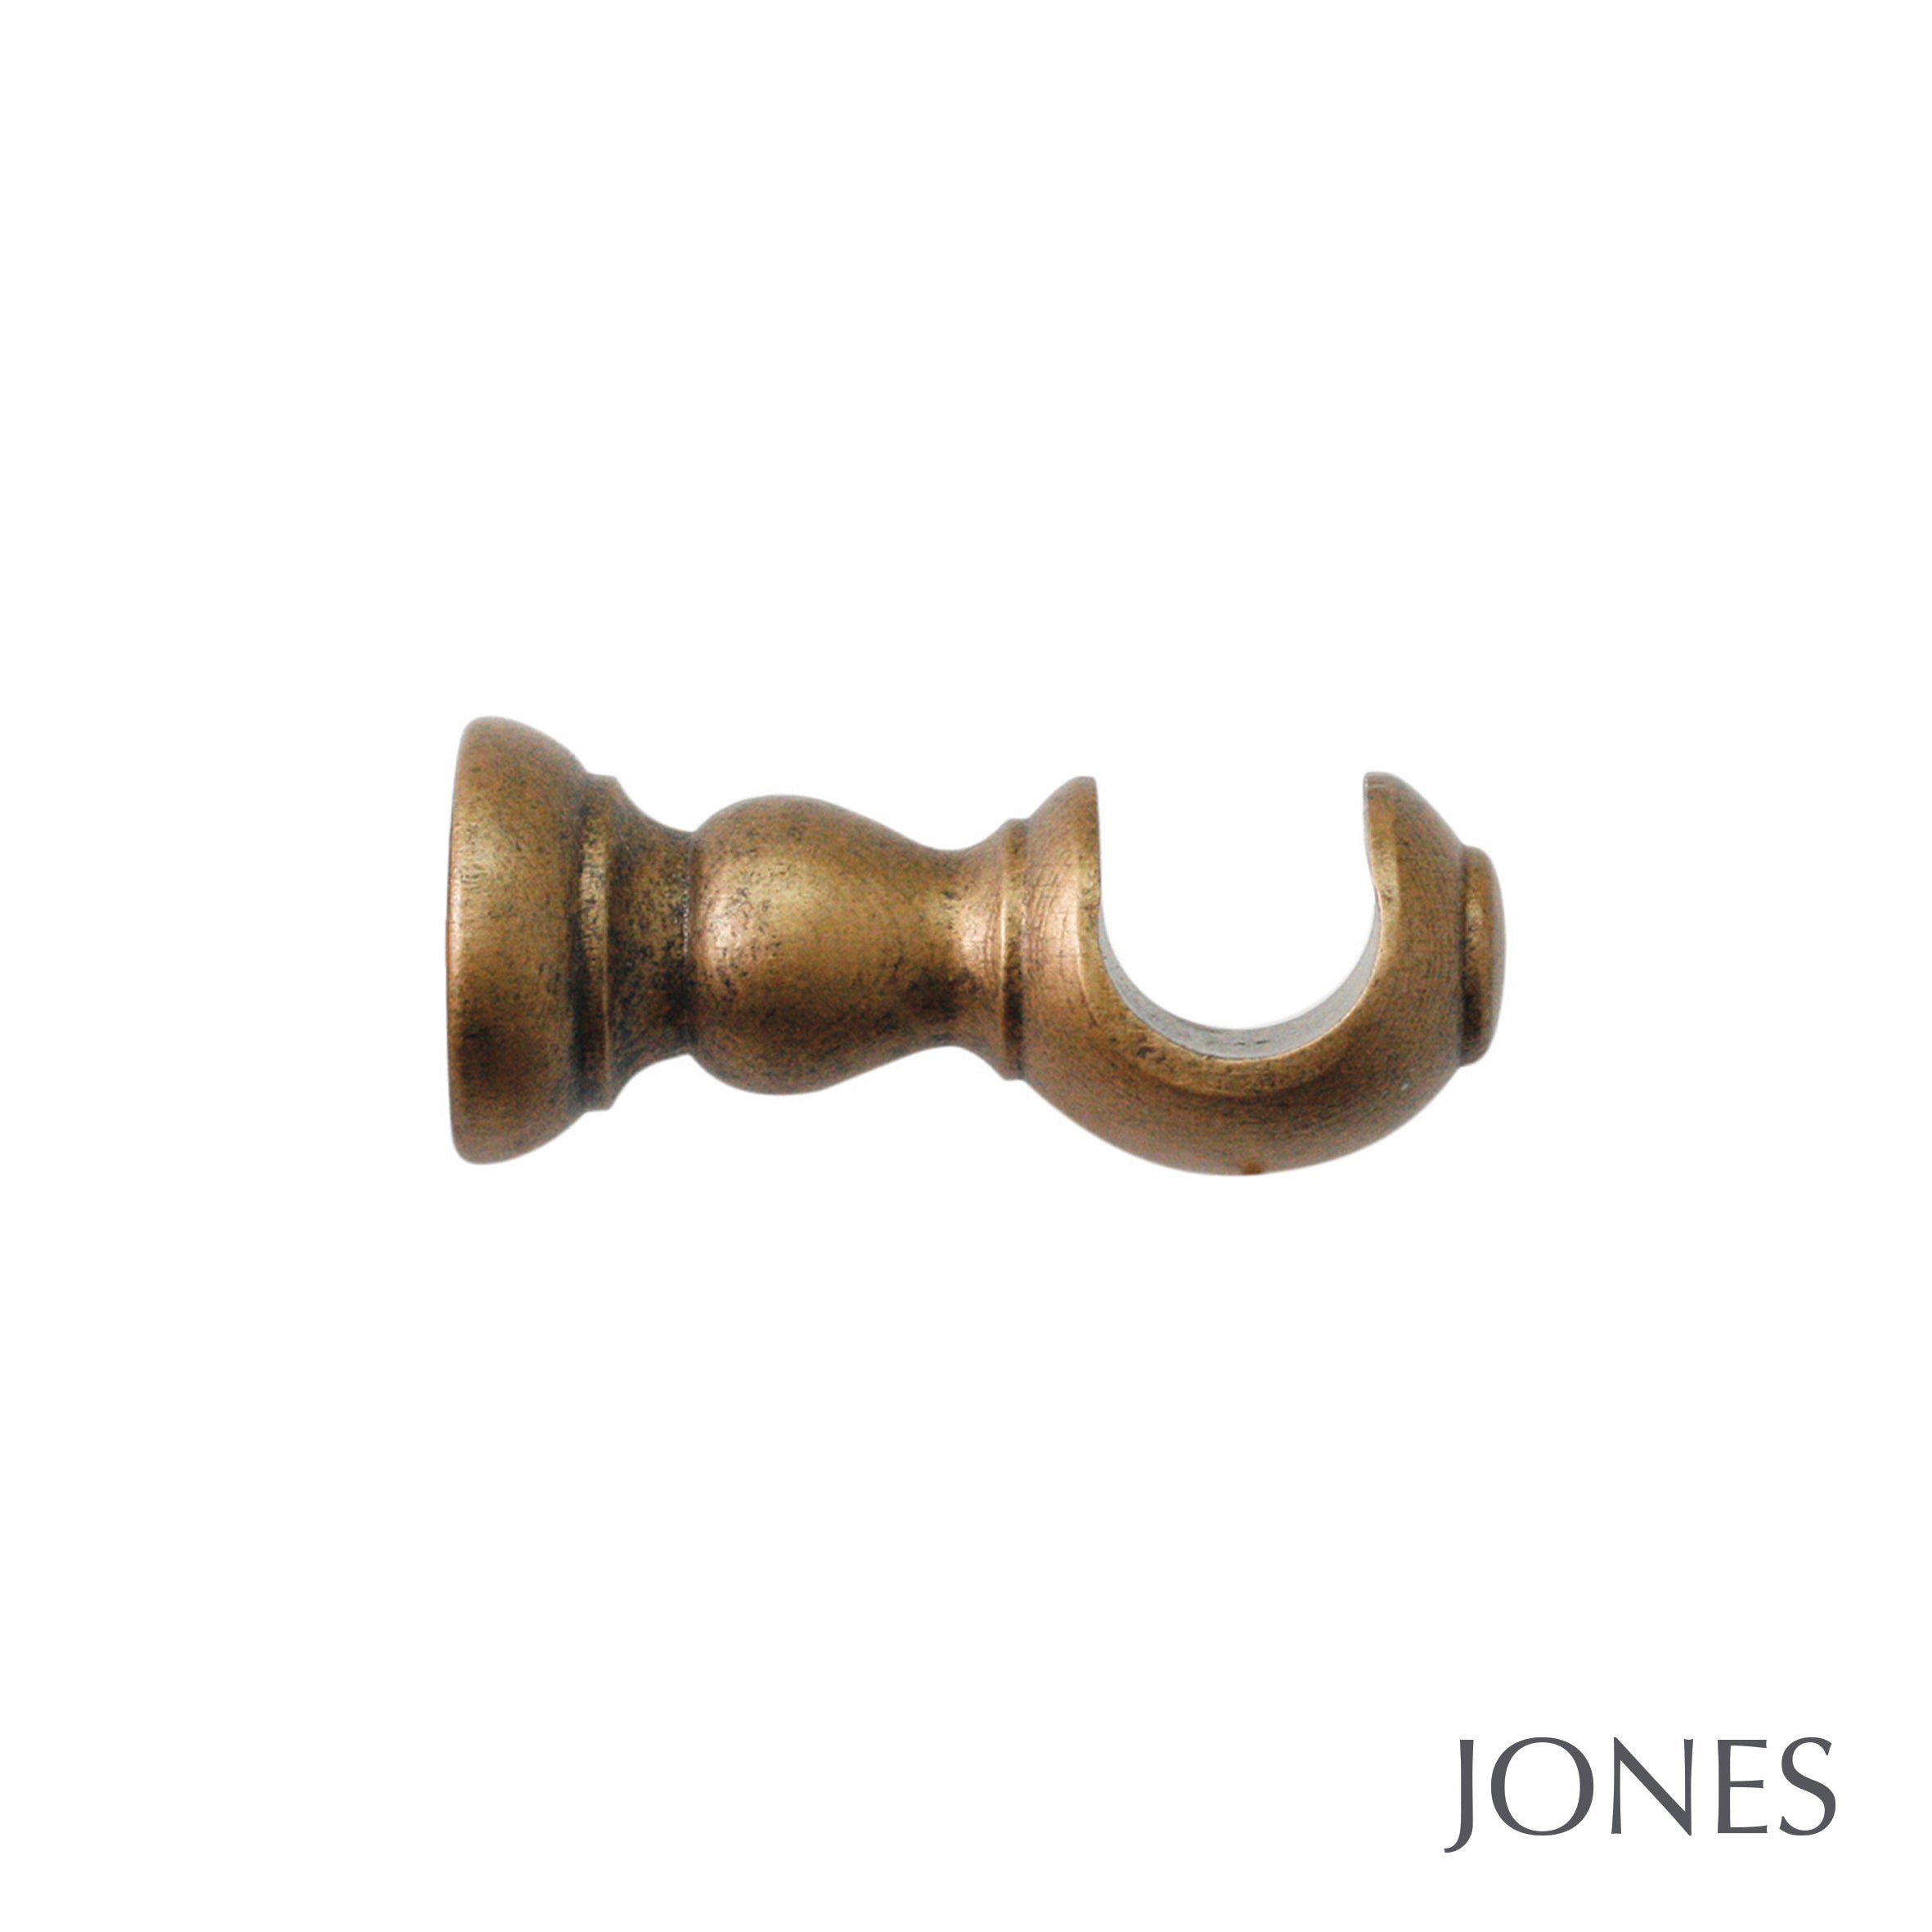 Jones Interiors Cathedral Exeter Finial Curtain Pole Set in Antique Gold